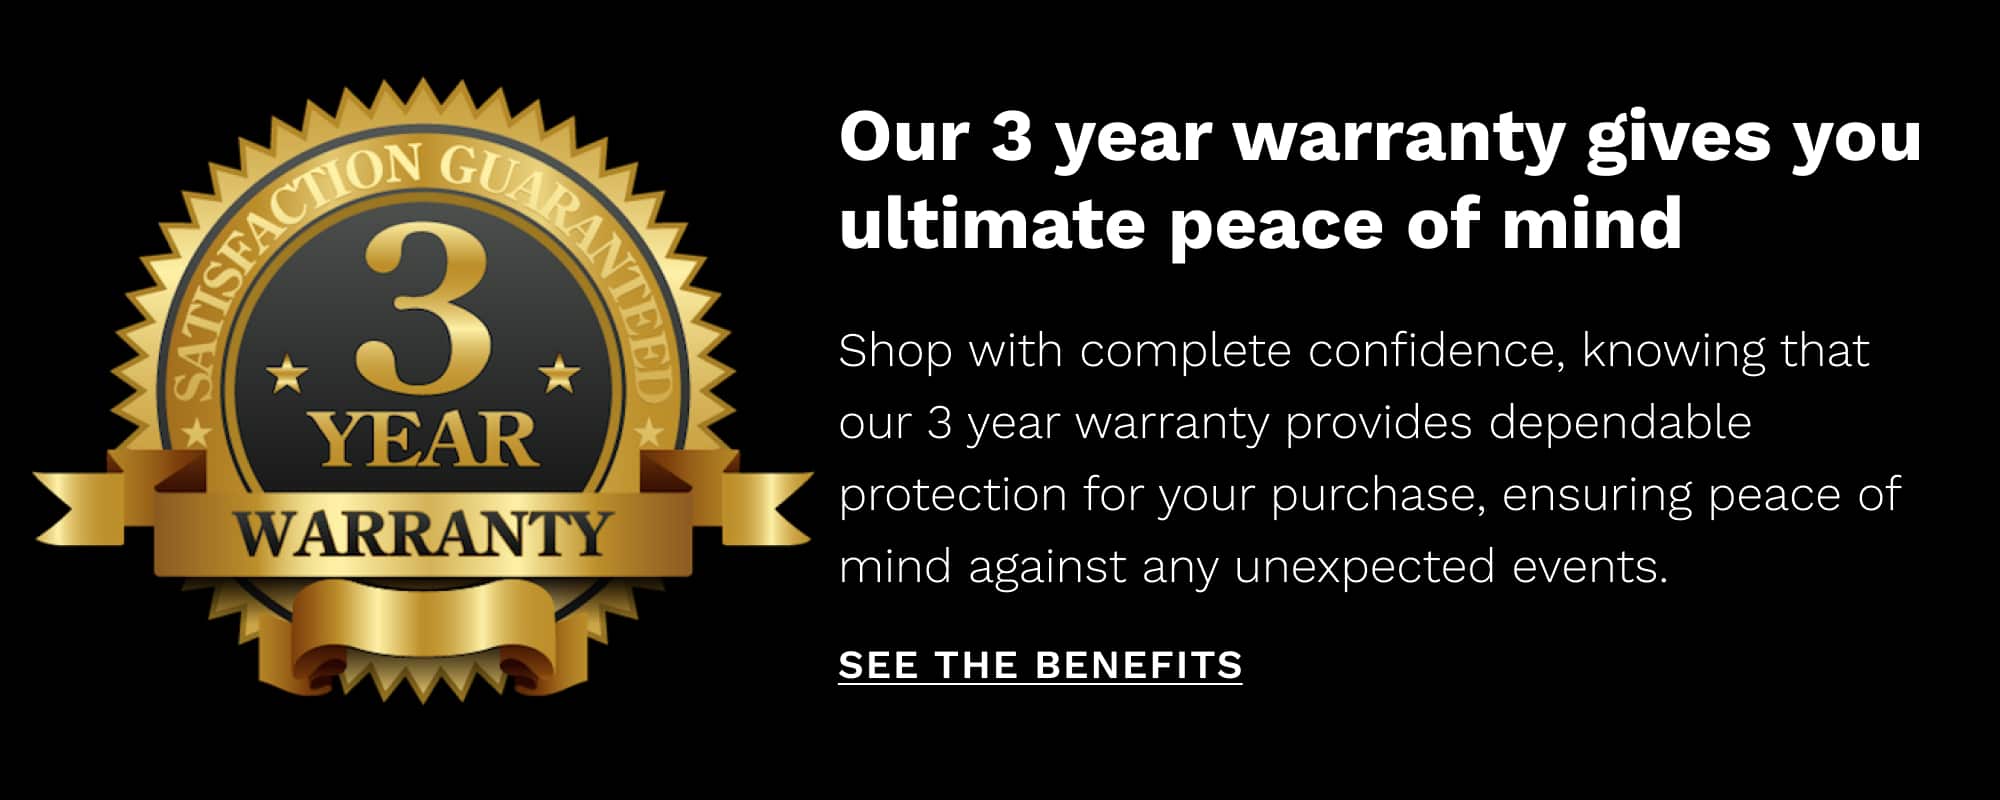 The Little Tulip Shop 3 year warranty guarantee and promise is showcased in this banner of gold crest, white headlines atop a black background